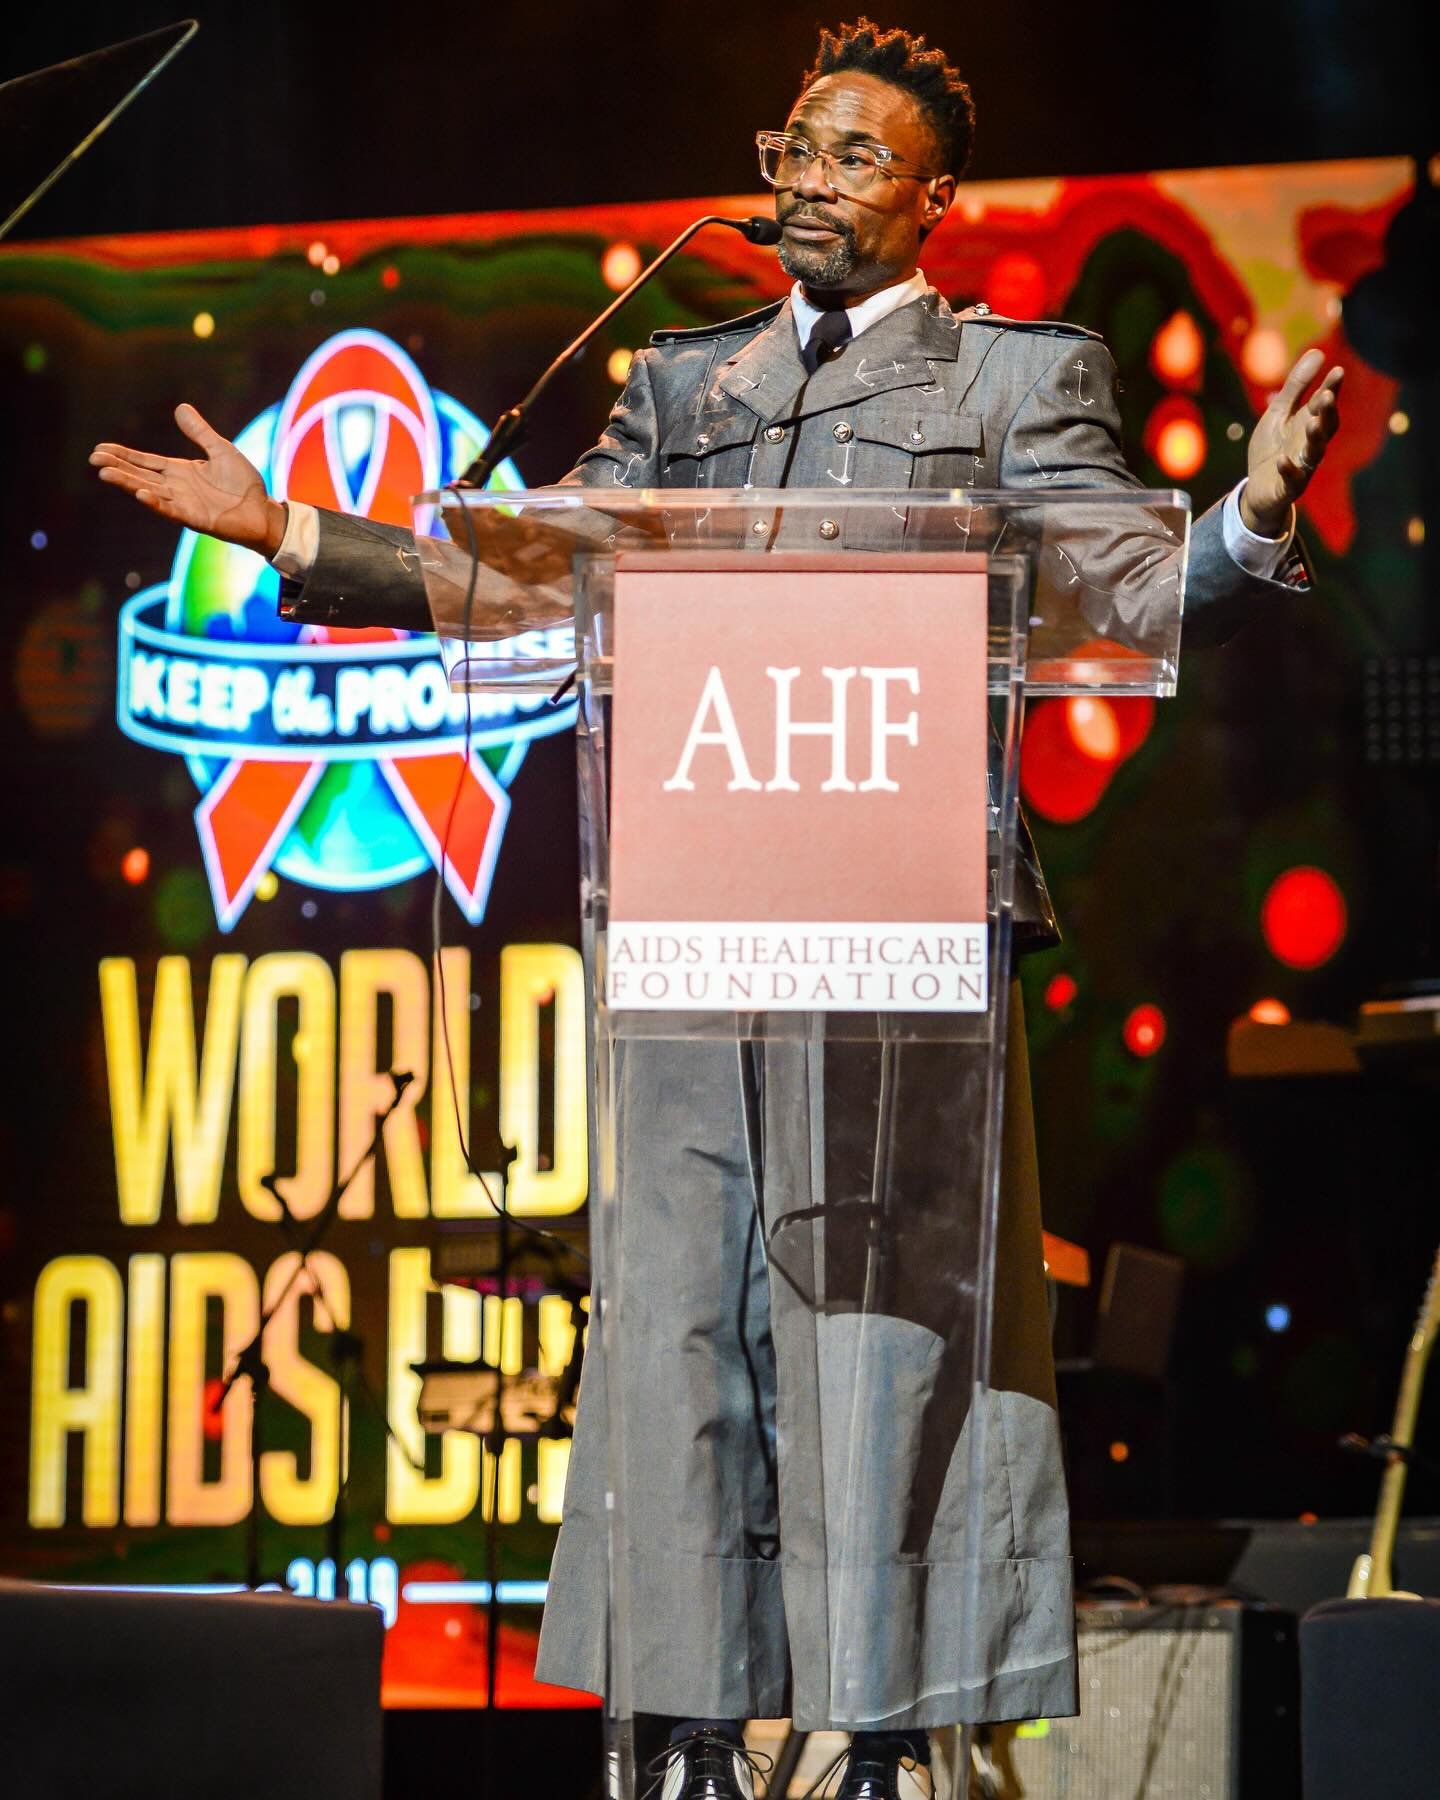 Emmy Award-winner @theebillyporter hosted the AIDS Healthcare Foundation- Keep the Promise Concert for World AIDS Day. We are proud to stand together with our clients, advocates, and partners to commemorate these events that bring attention to the co